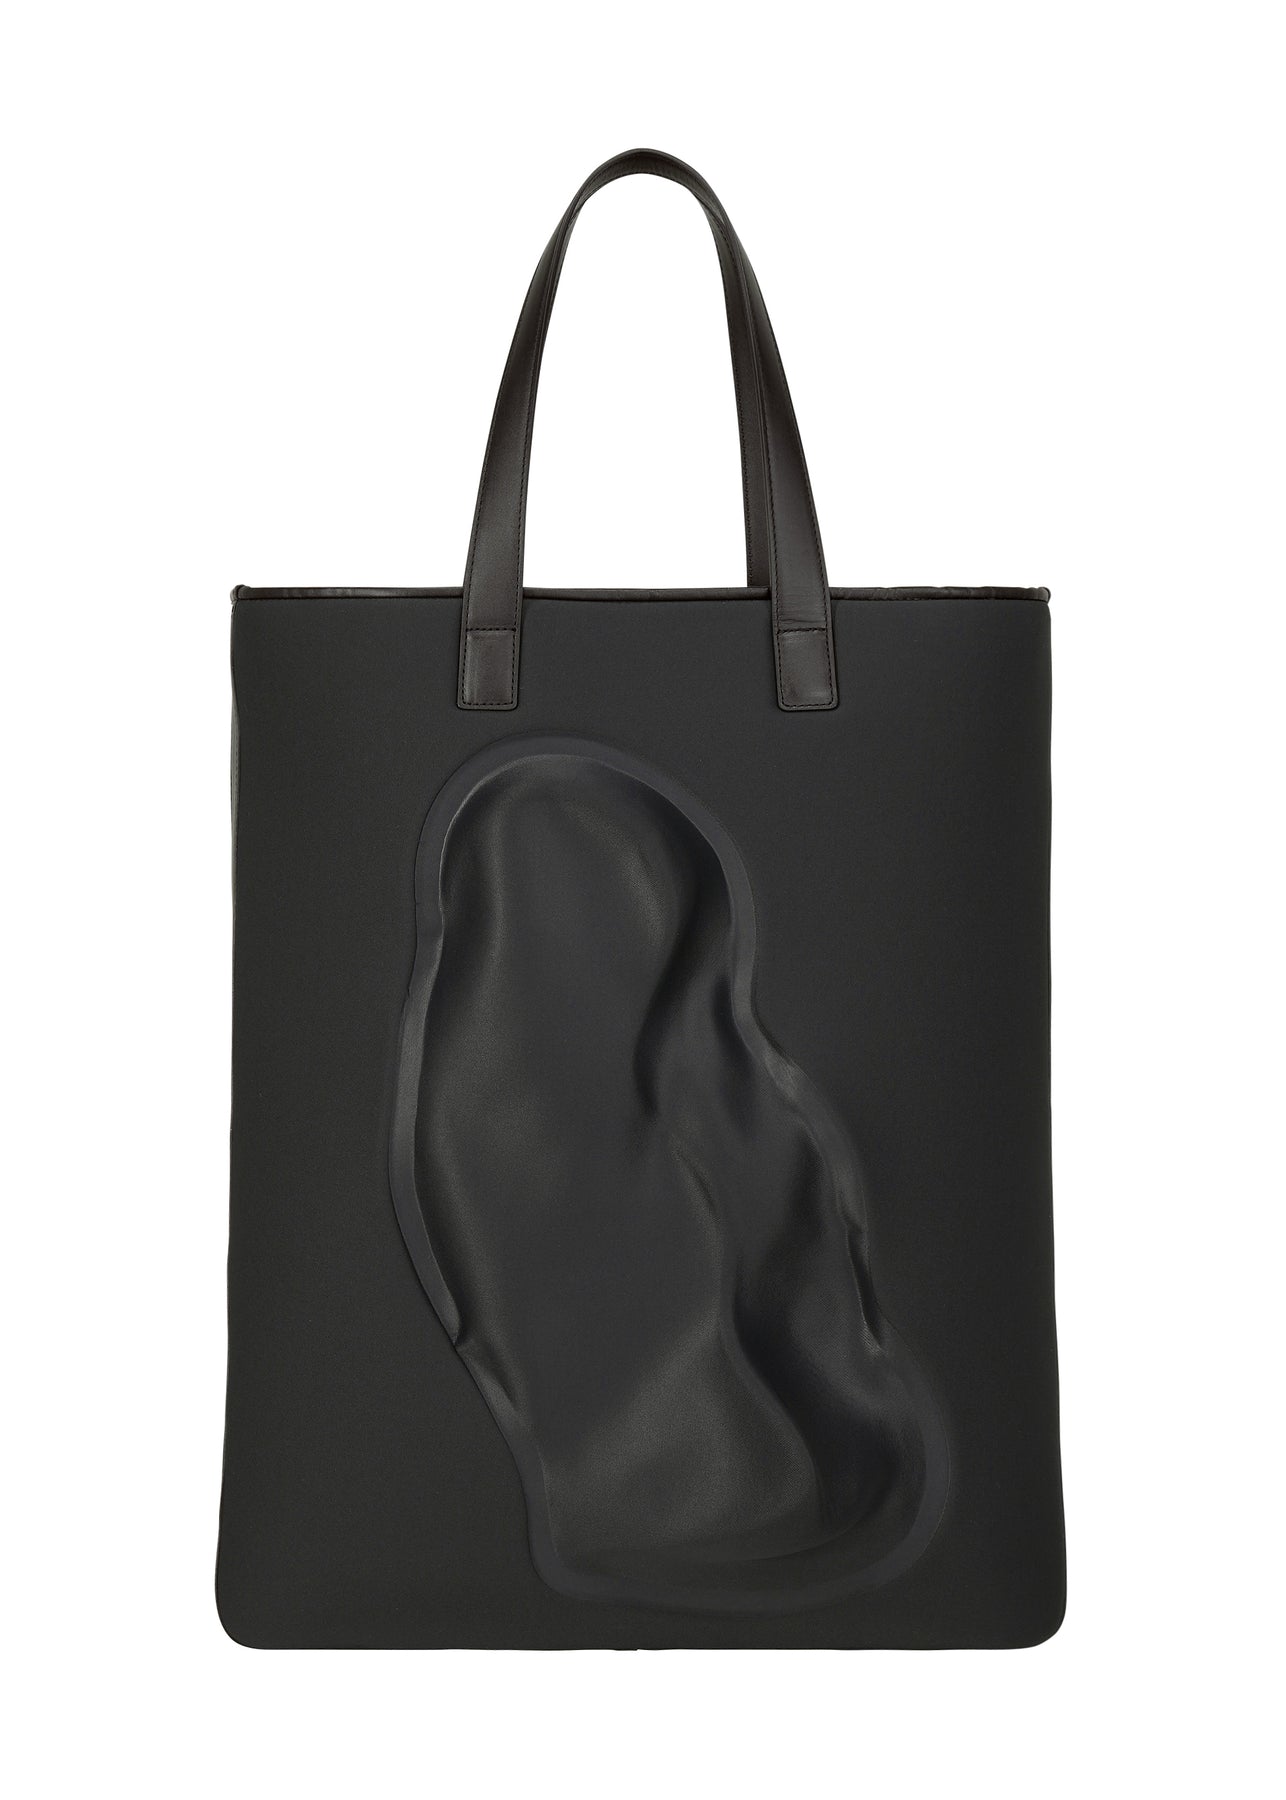 MOLD BAG | The official ISSEY MIYAKE ONLINE STORE | ISSEY MIYAKE USA